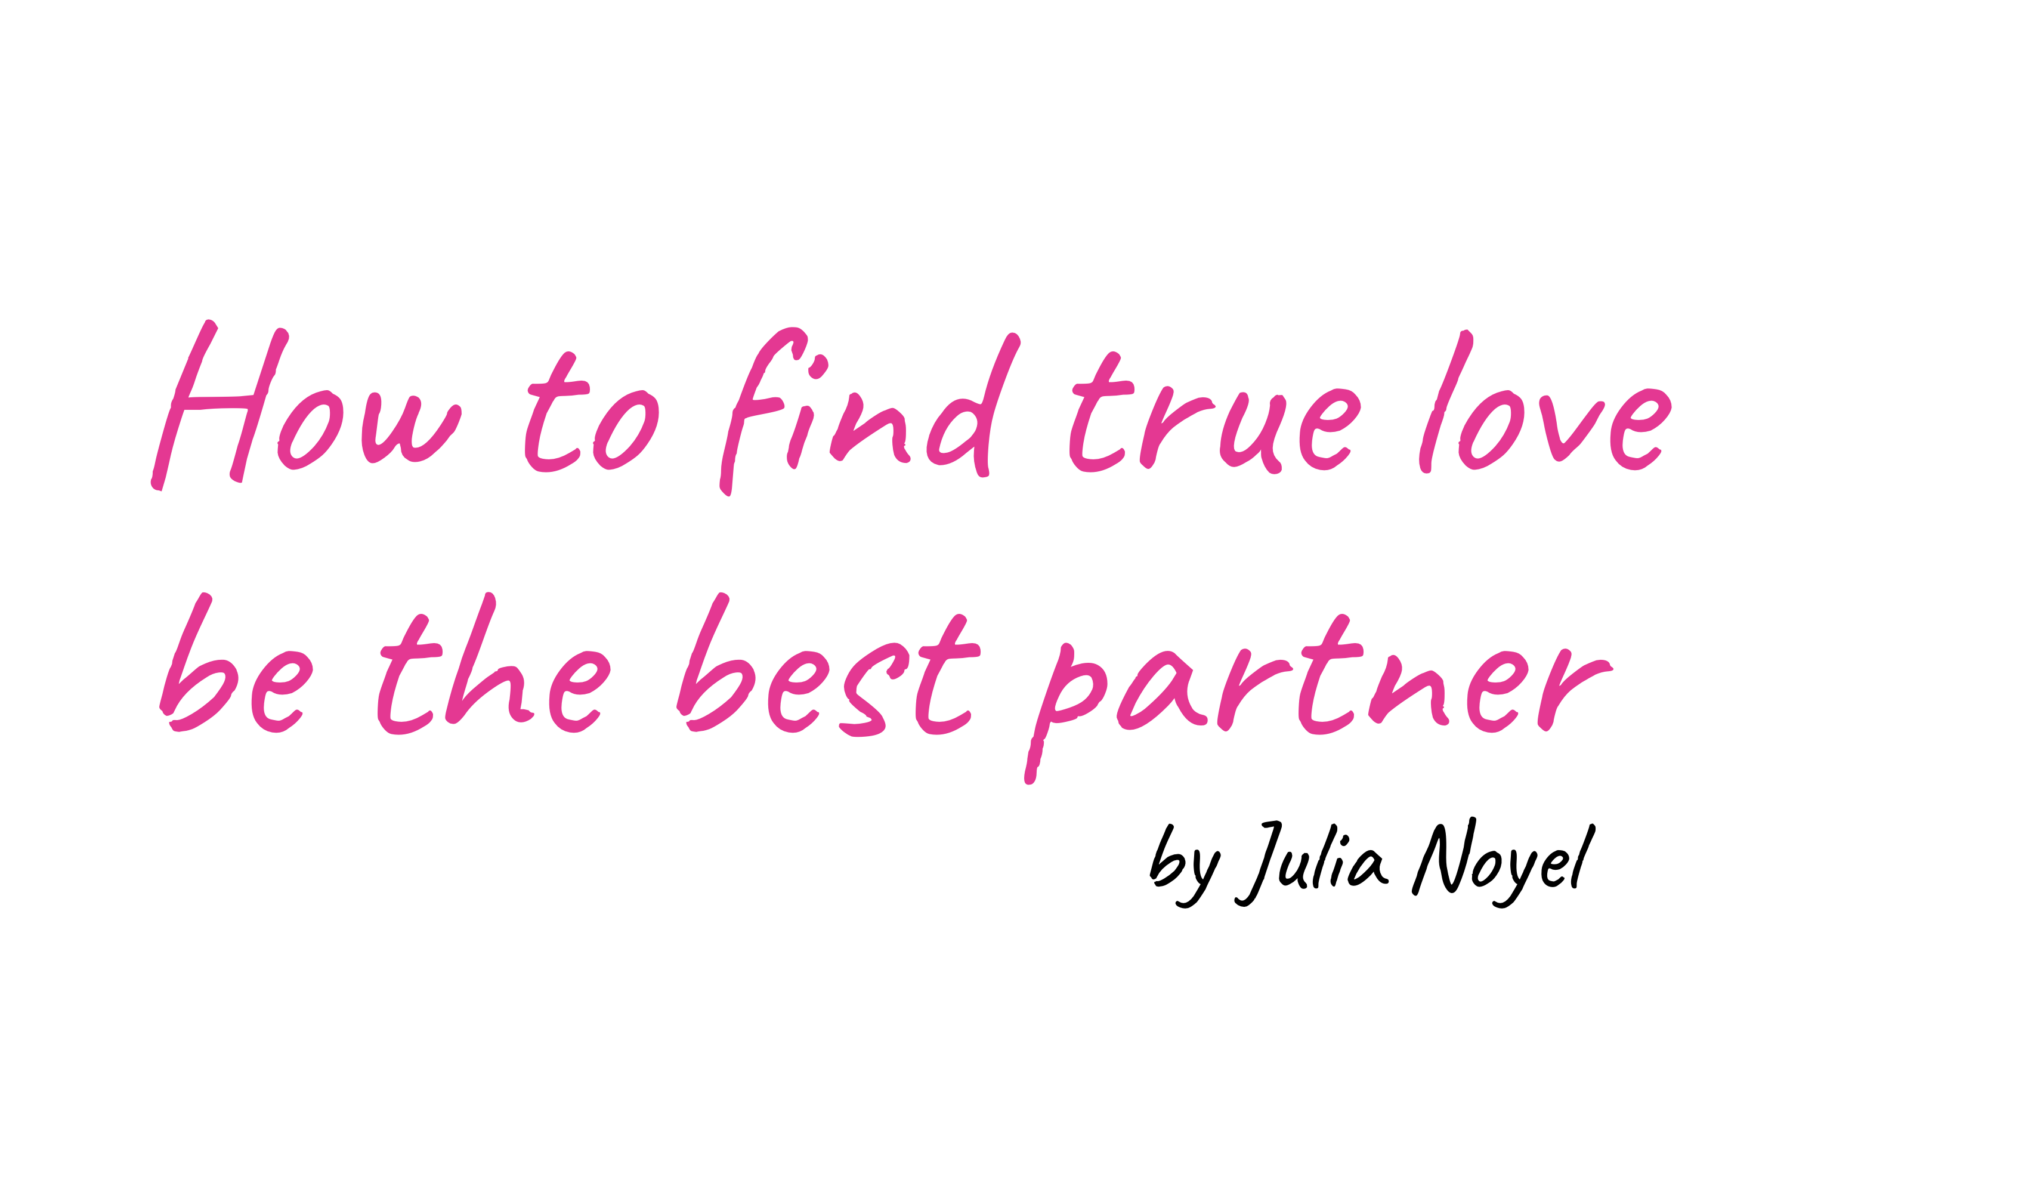 How to find true love be the best partner by Julia Noyel